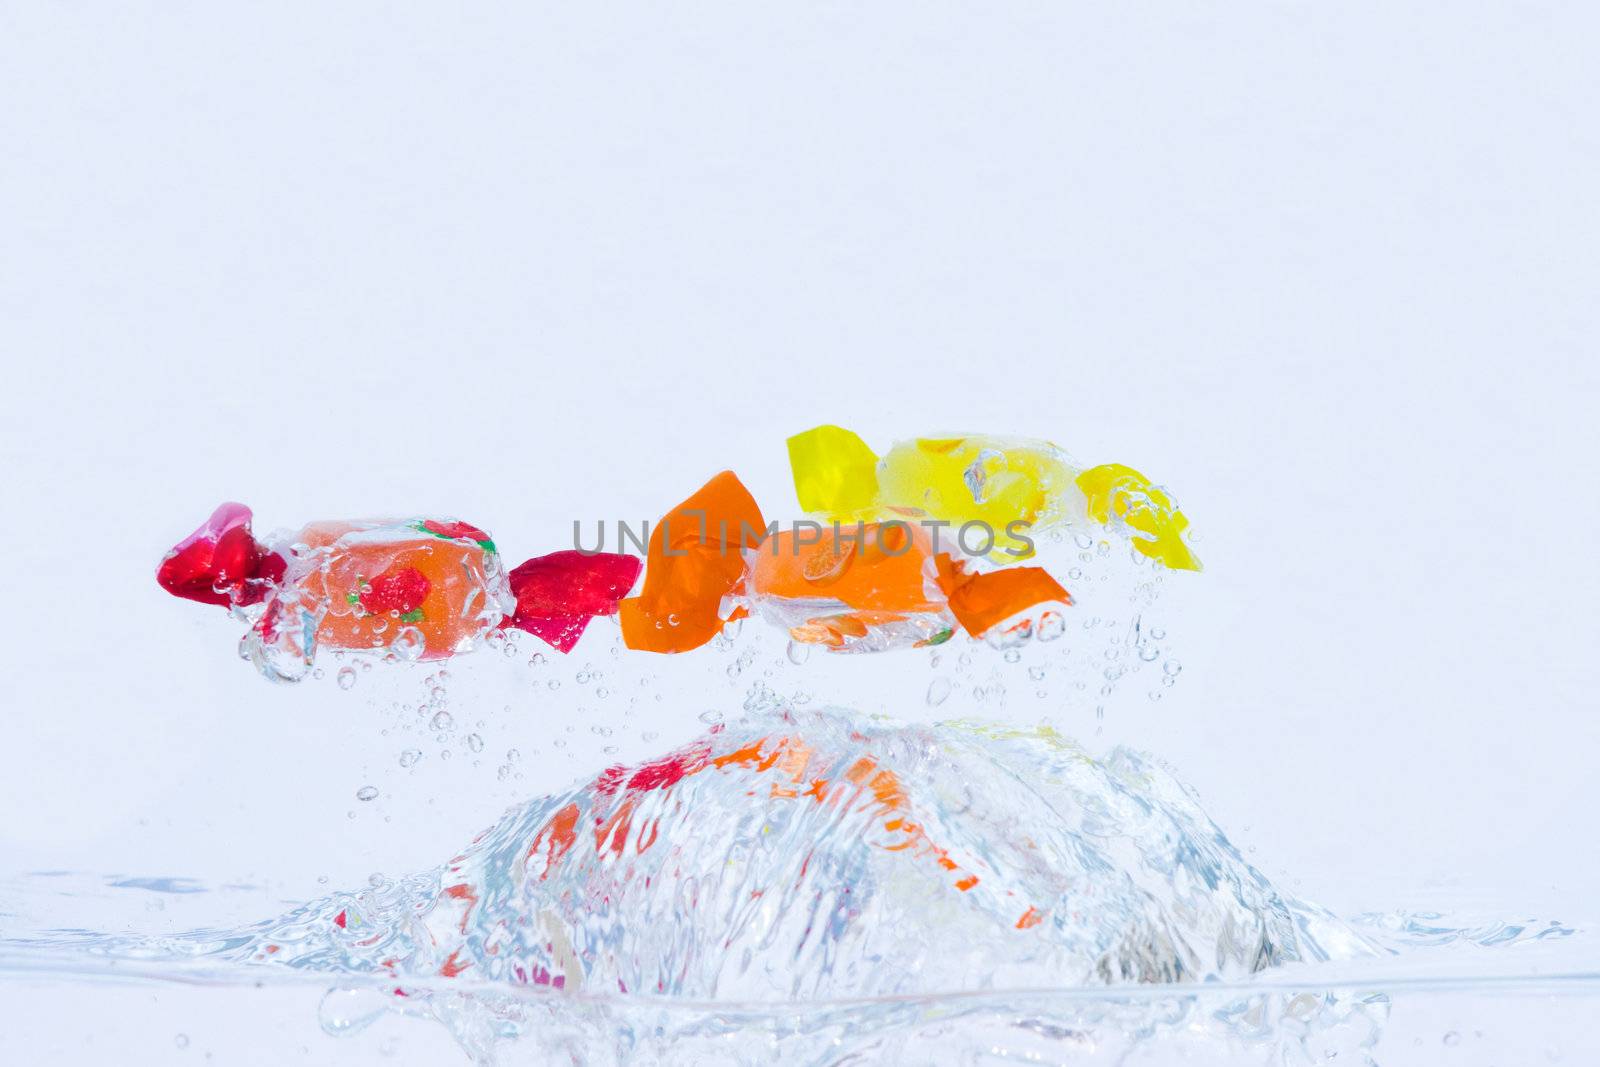 Splash of colorful fruit candies in the water with blue tint.